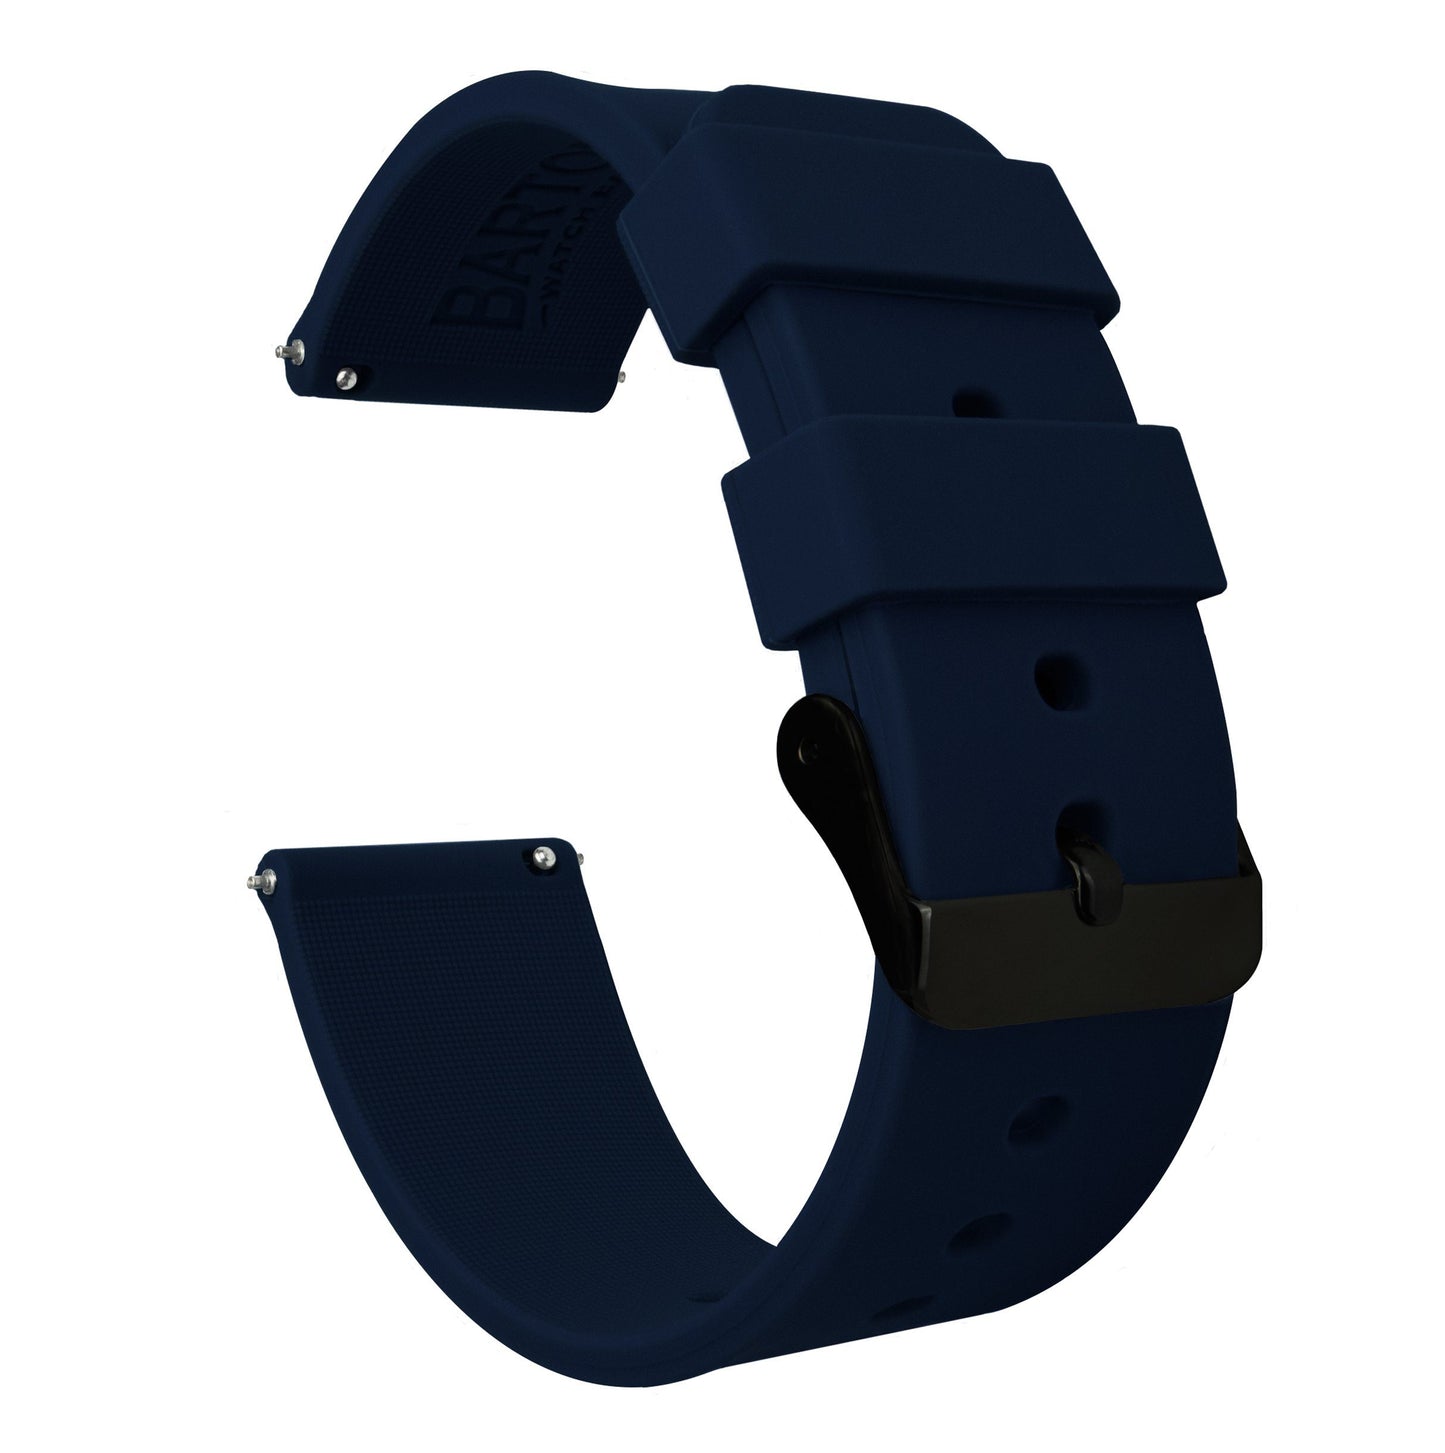 Fossil Gen 5  | Silicone | Navy Blue - Barton Watch Bands